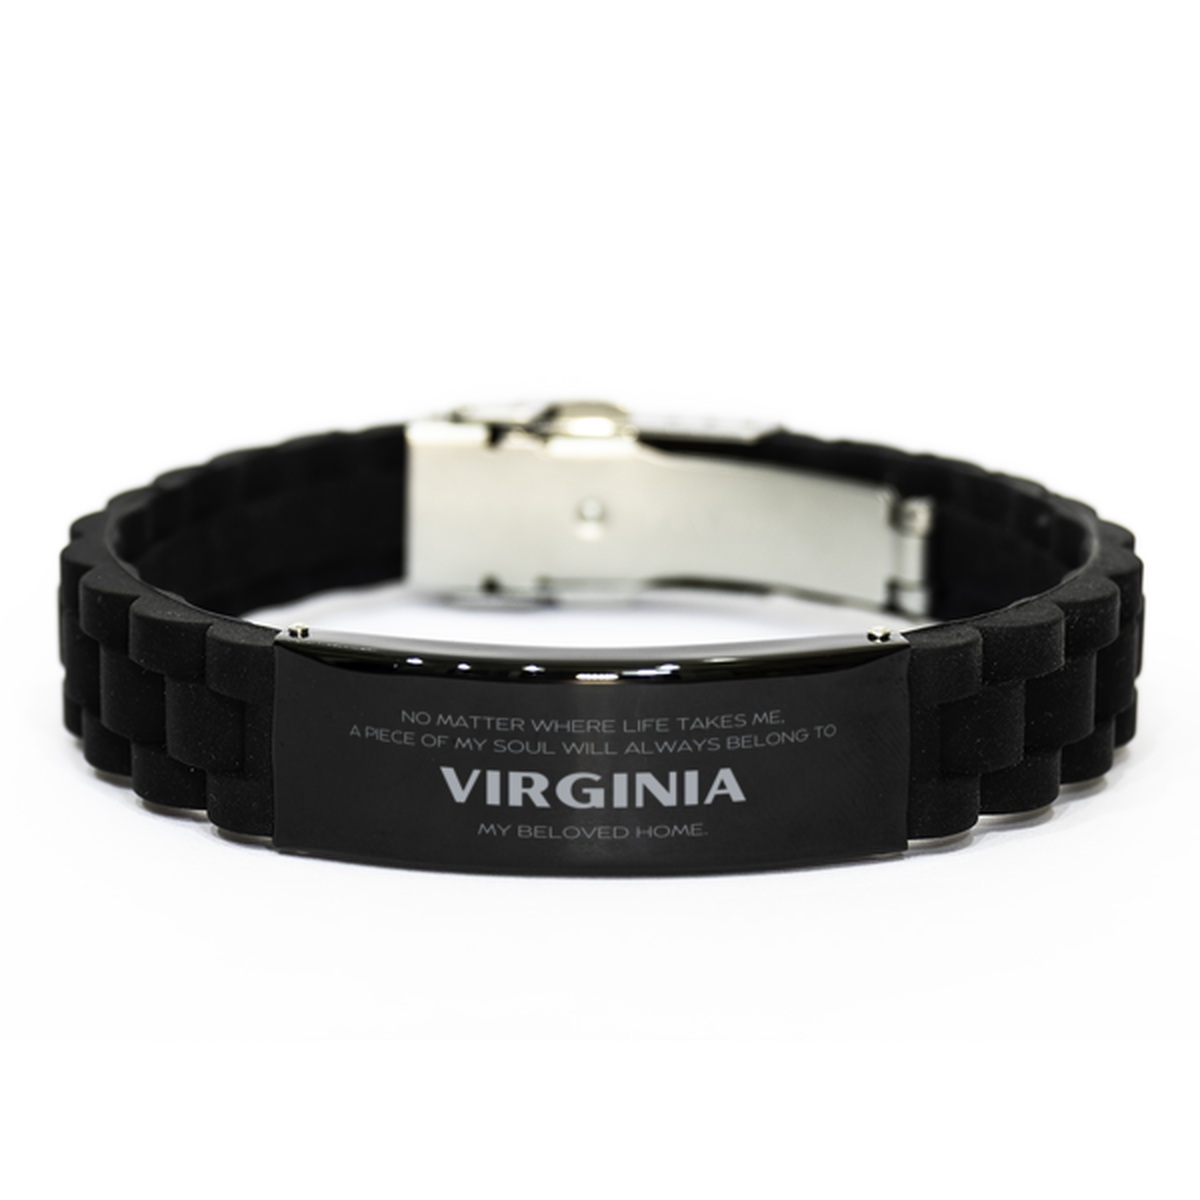 Love Virginia State Gifts, My soul will always belong to Virginia, Proud Black Glidelock Clasp Bracelet, Birthday Unique Gifts For Virginia Men, Women, Friends